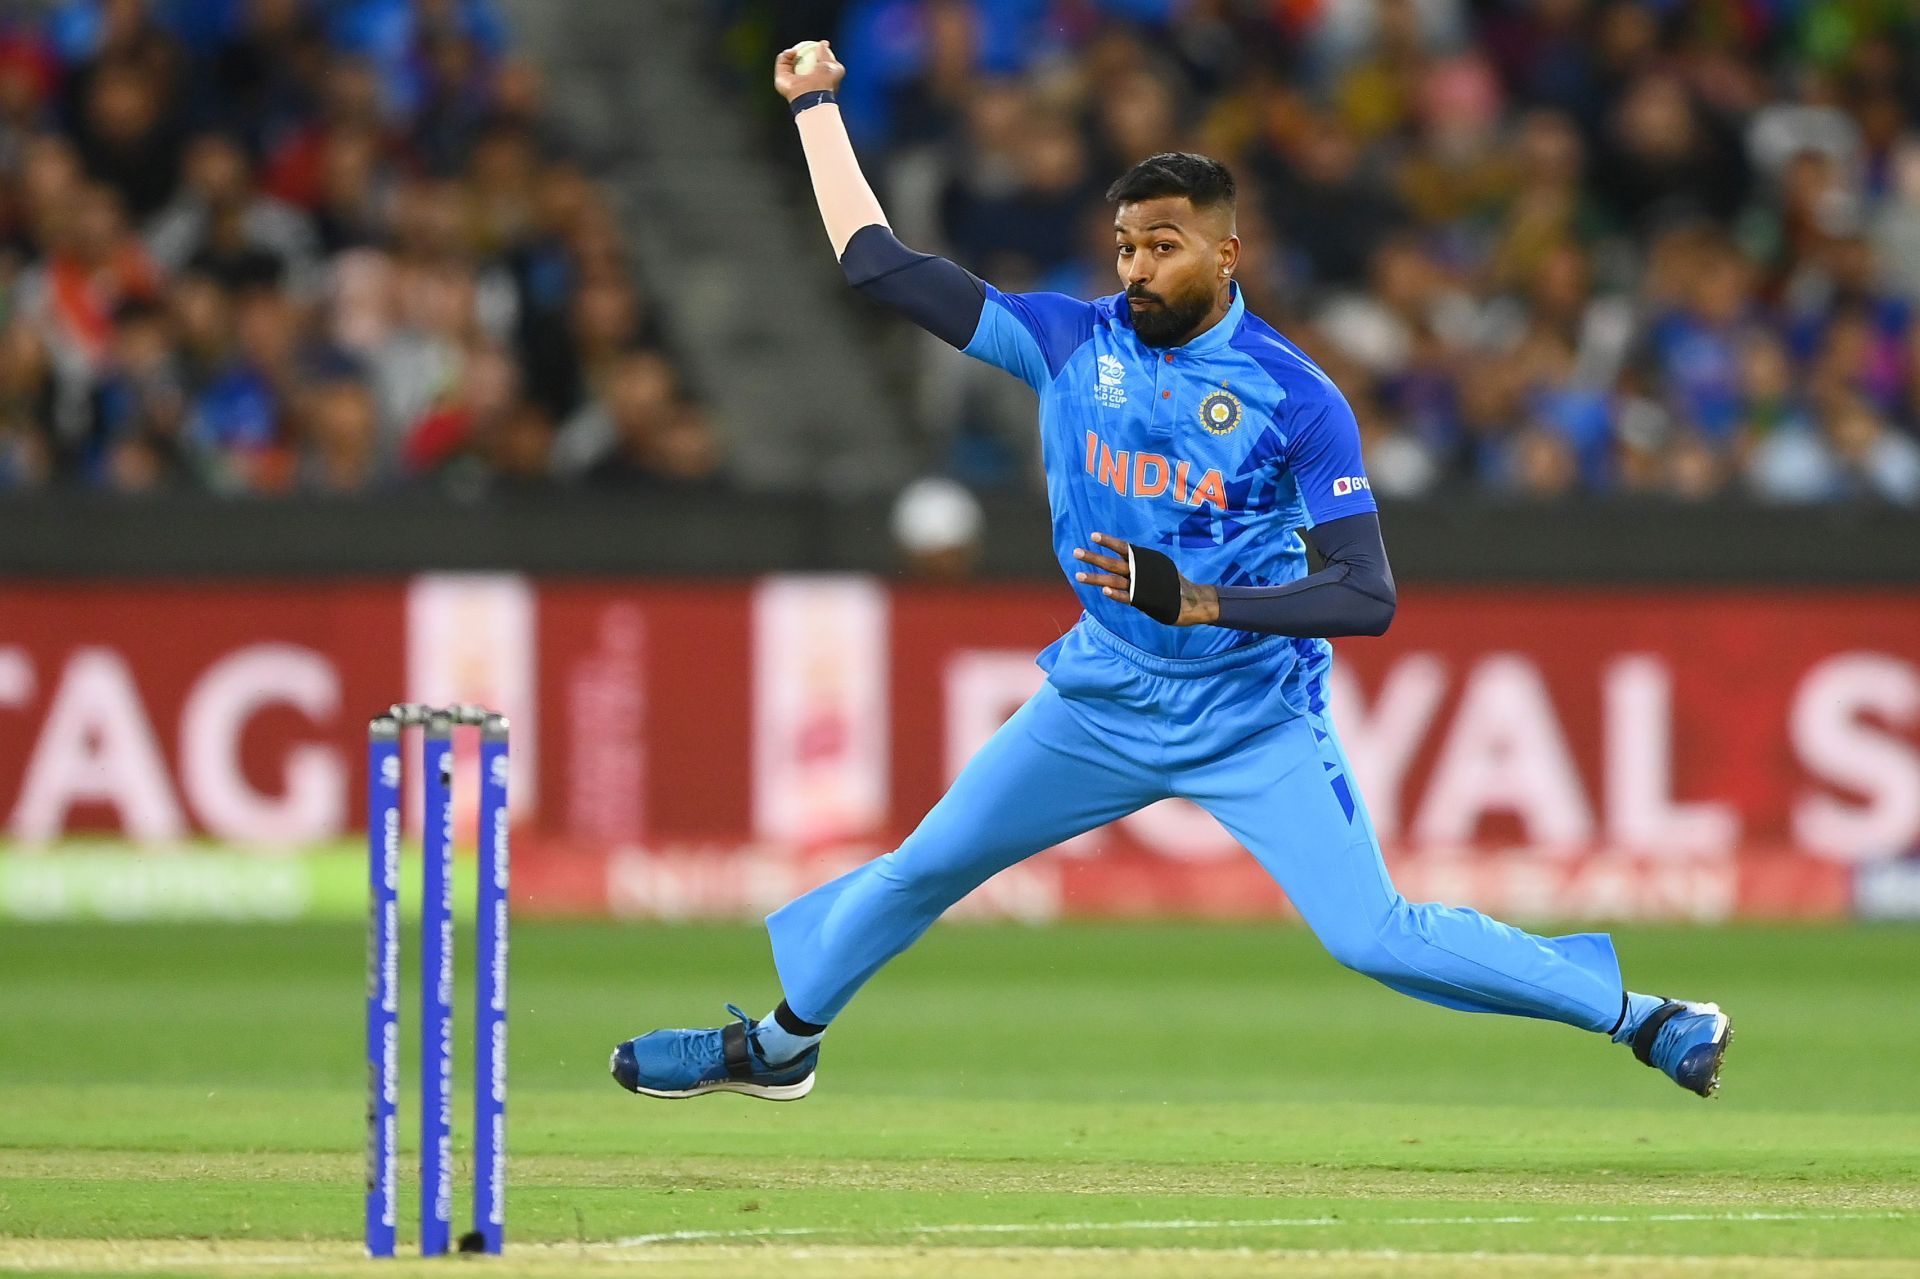 Hardik Pandya picked up three crucial wickets in the middle overs.